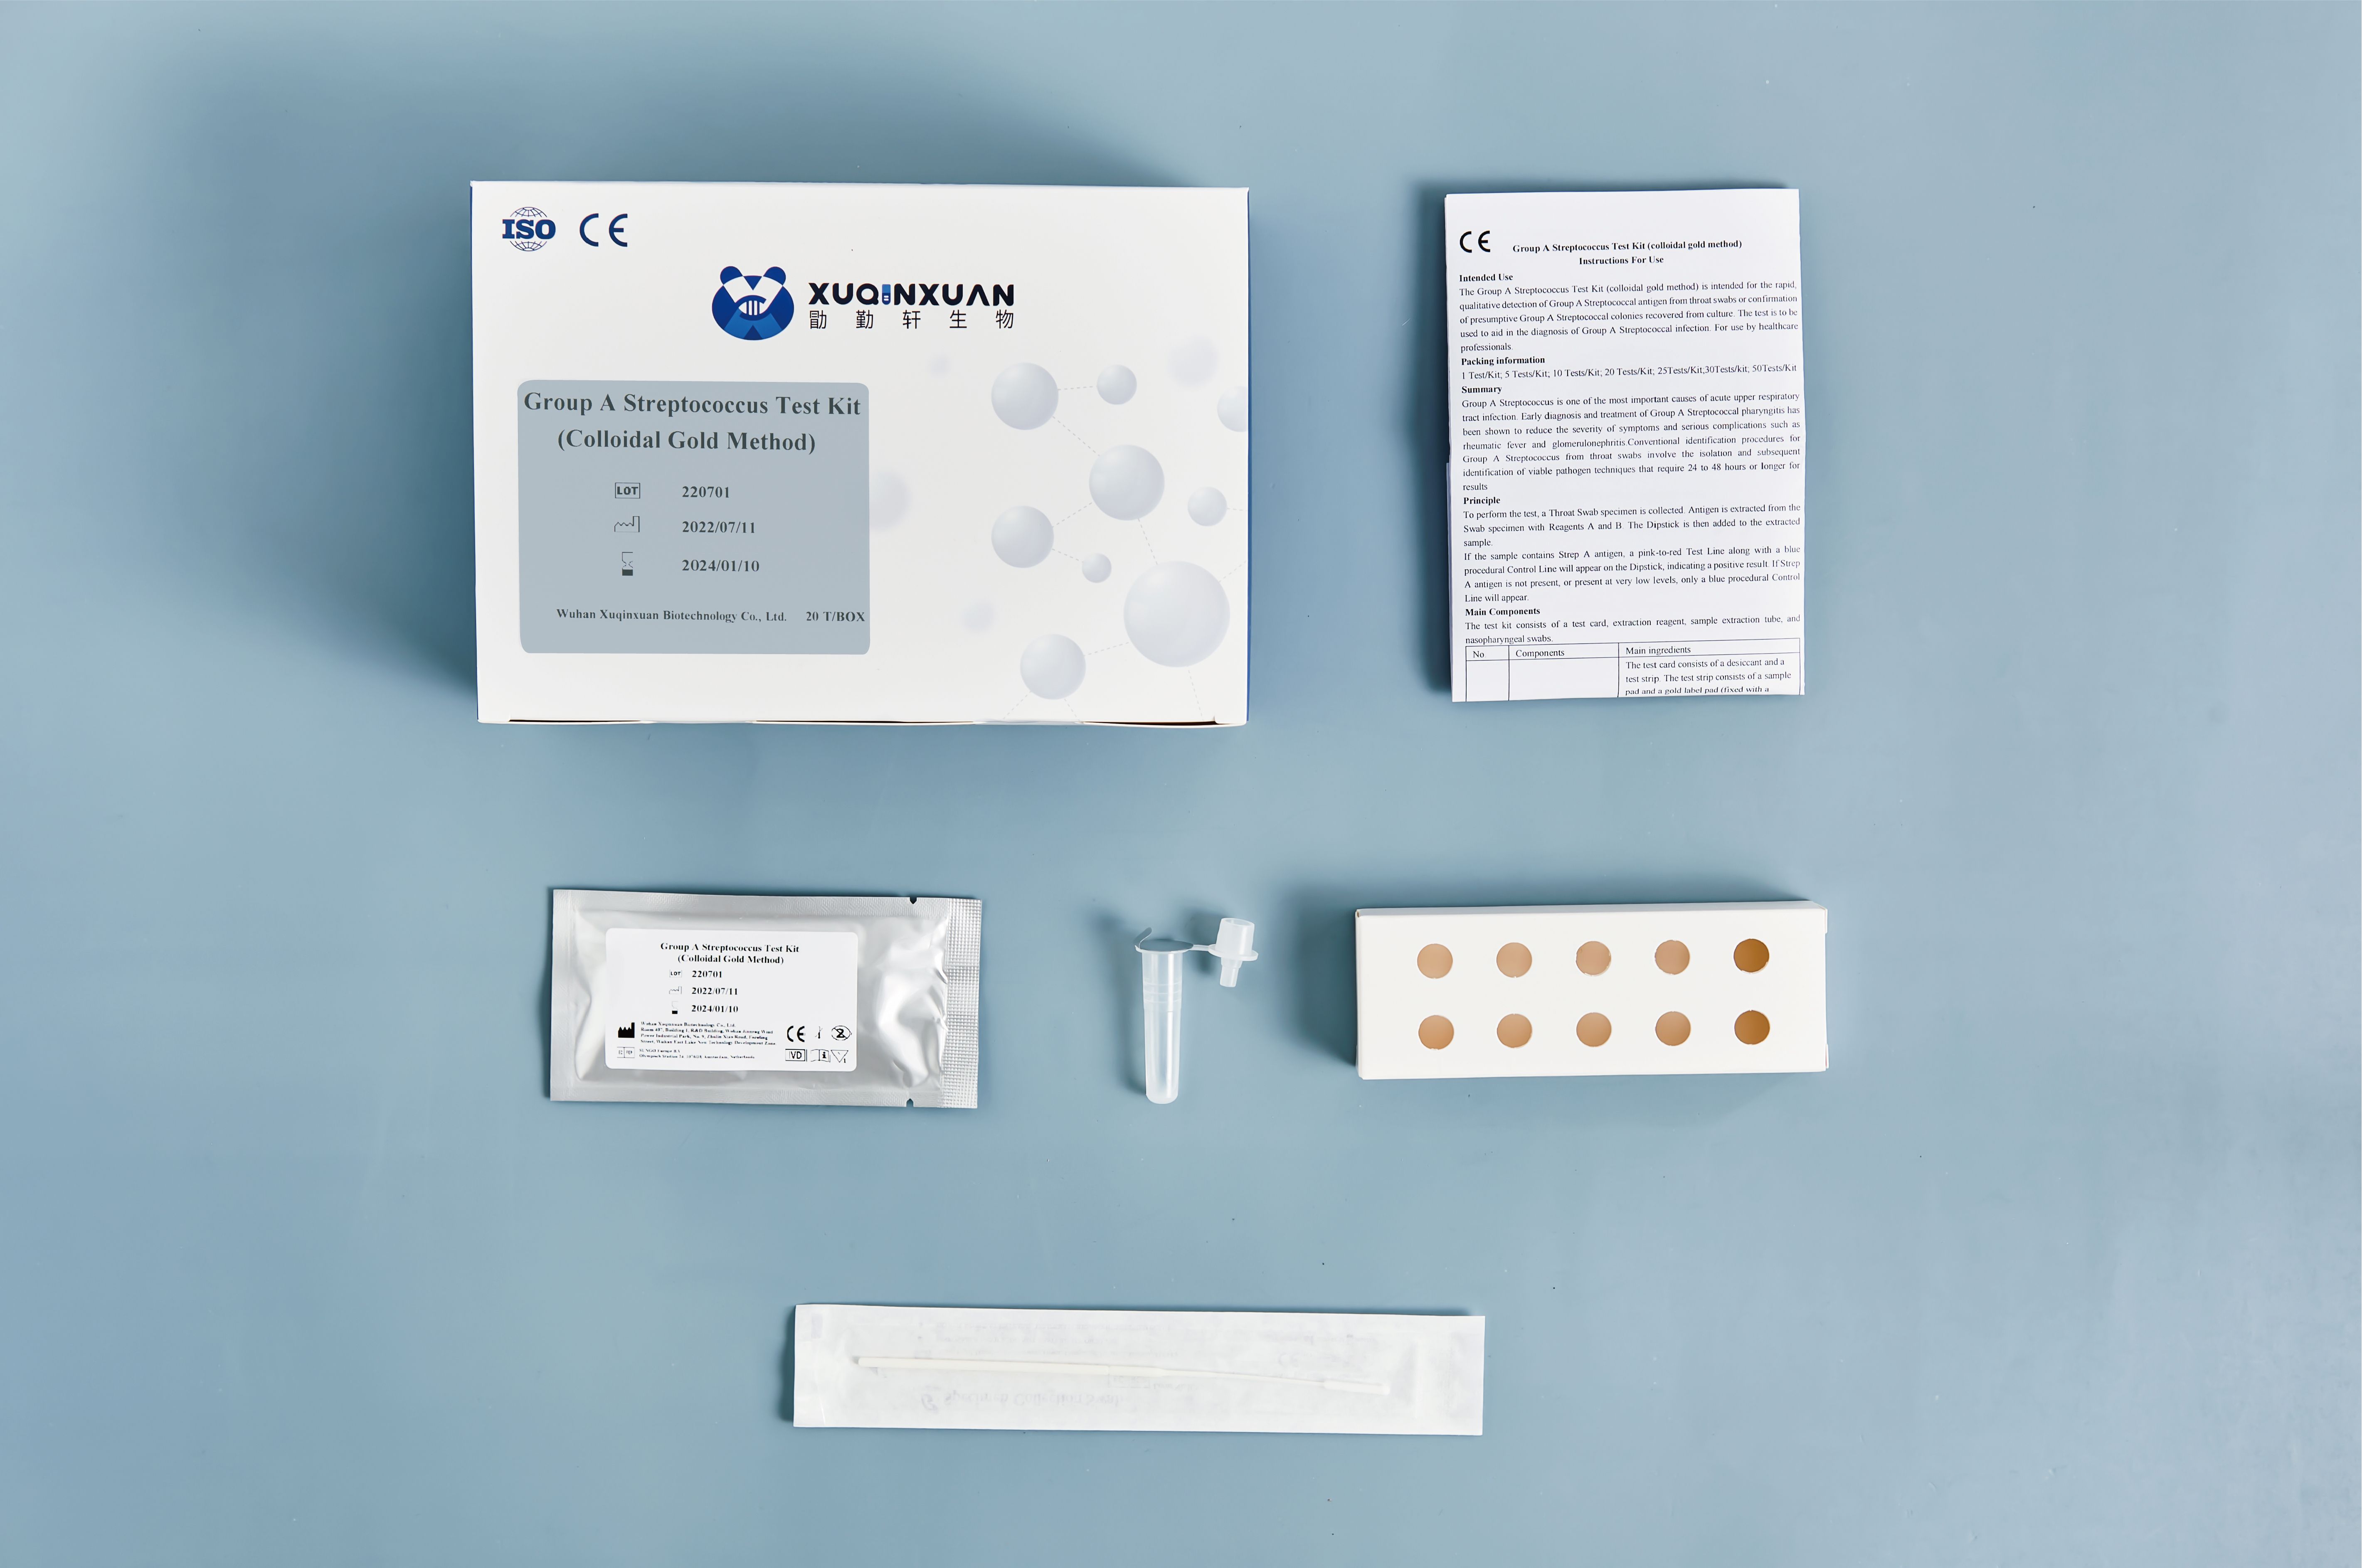 Group A Streptococcus Test Kit (colloidal gold method) 